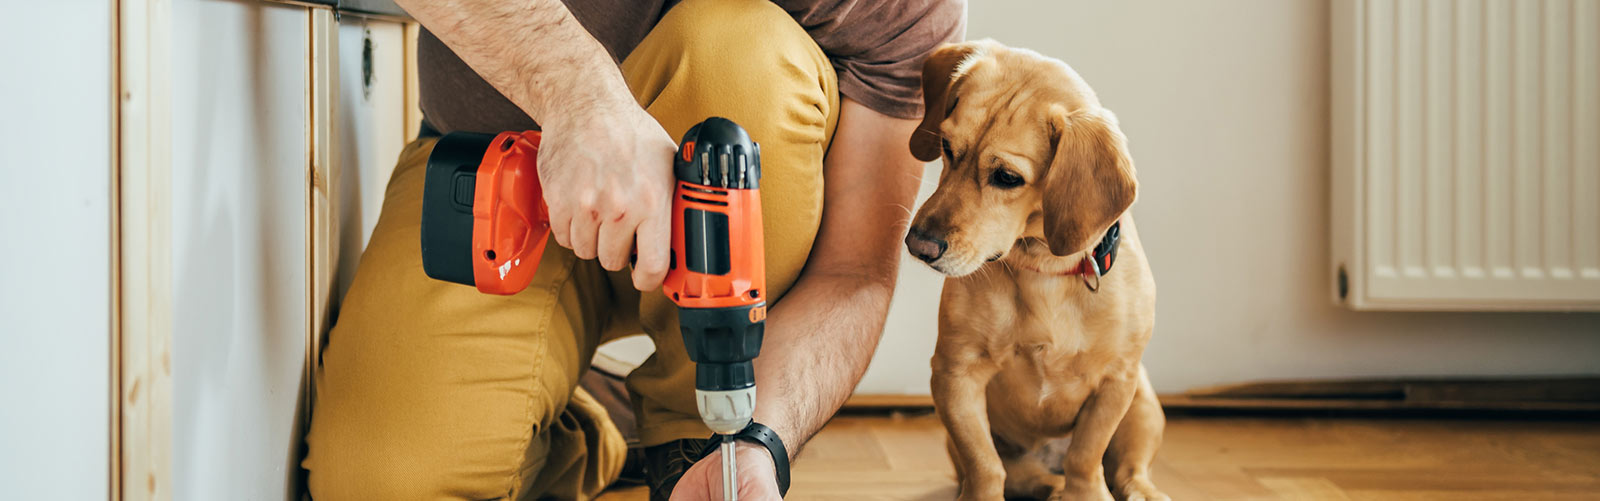 Man using drill with dog.